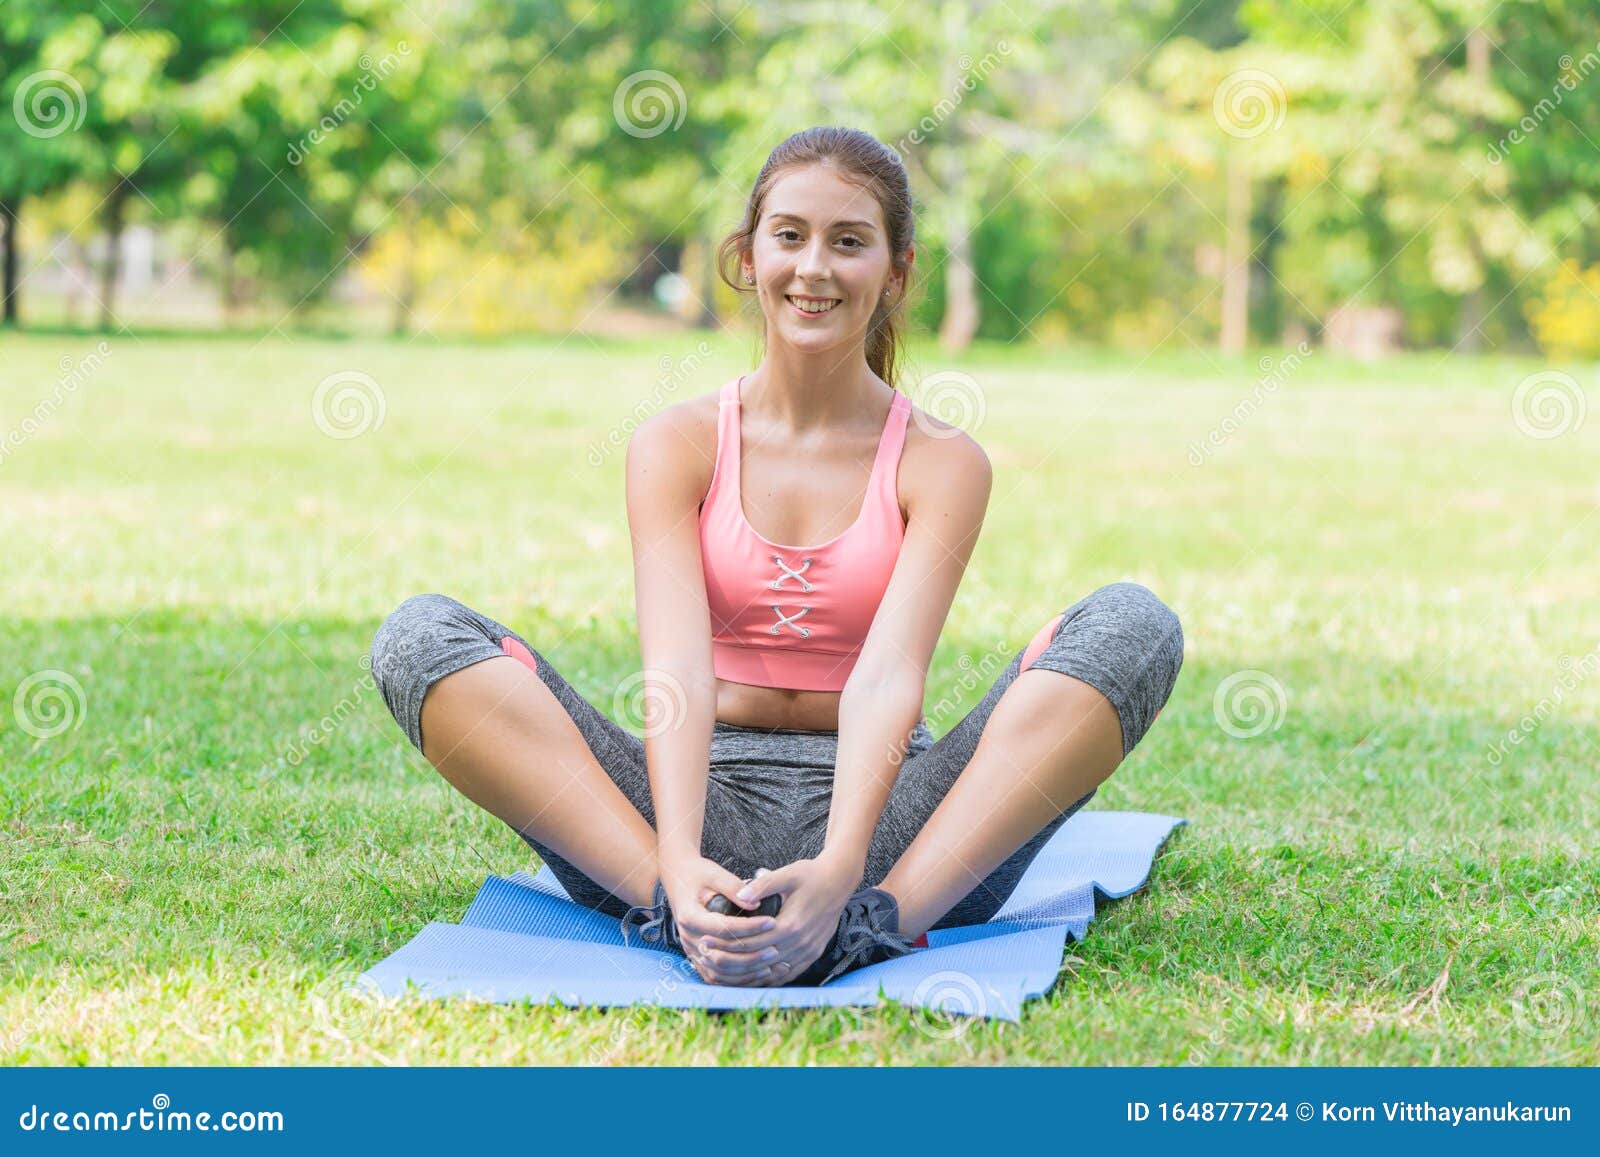 https://thumbs.dreamstime.com/z/cute-young-healthy-sport-teen-sitting-smiling-yoga-mat-outdoor-park-garden-cute-young-healthy-sport-teen-sitting-smiling-164877724.jpg